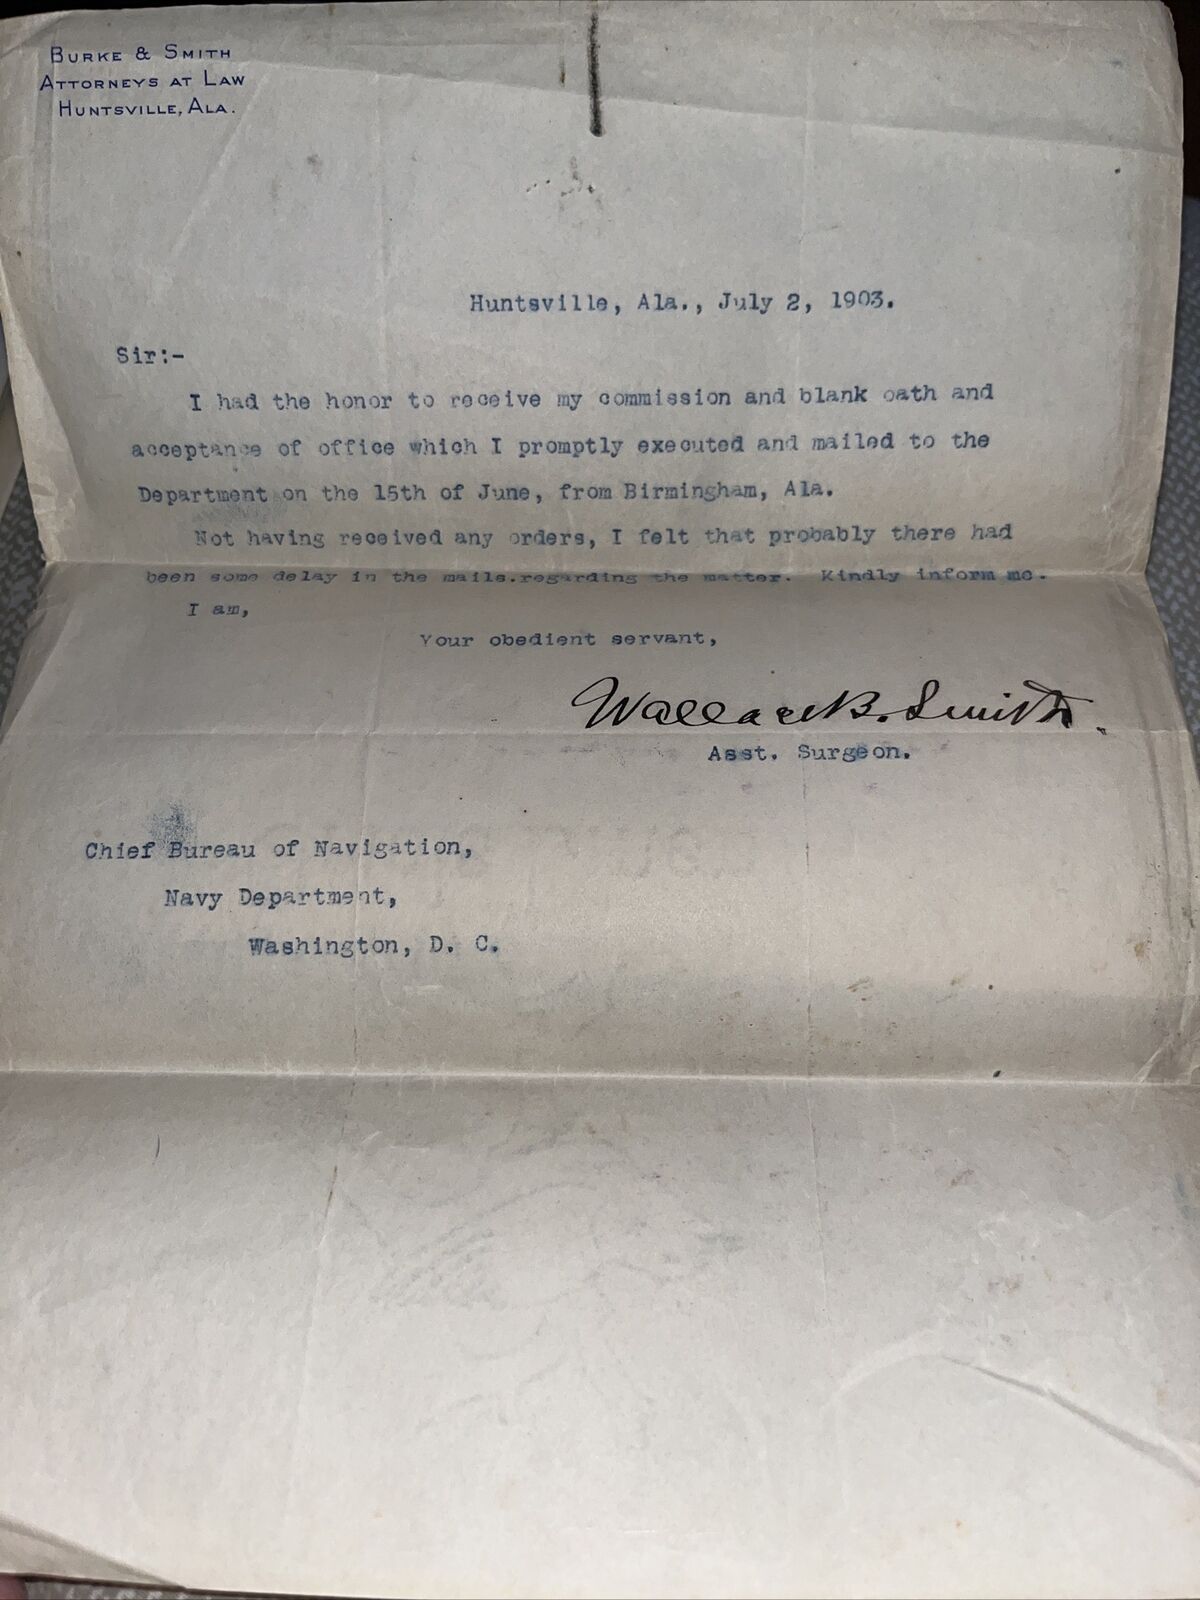 Antique 1903 Letter Requesting Orders From Chief Bureau of Navigation, US Navy